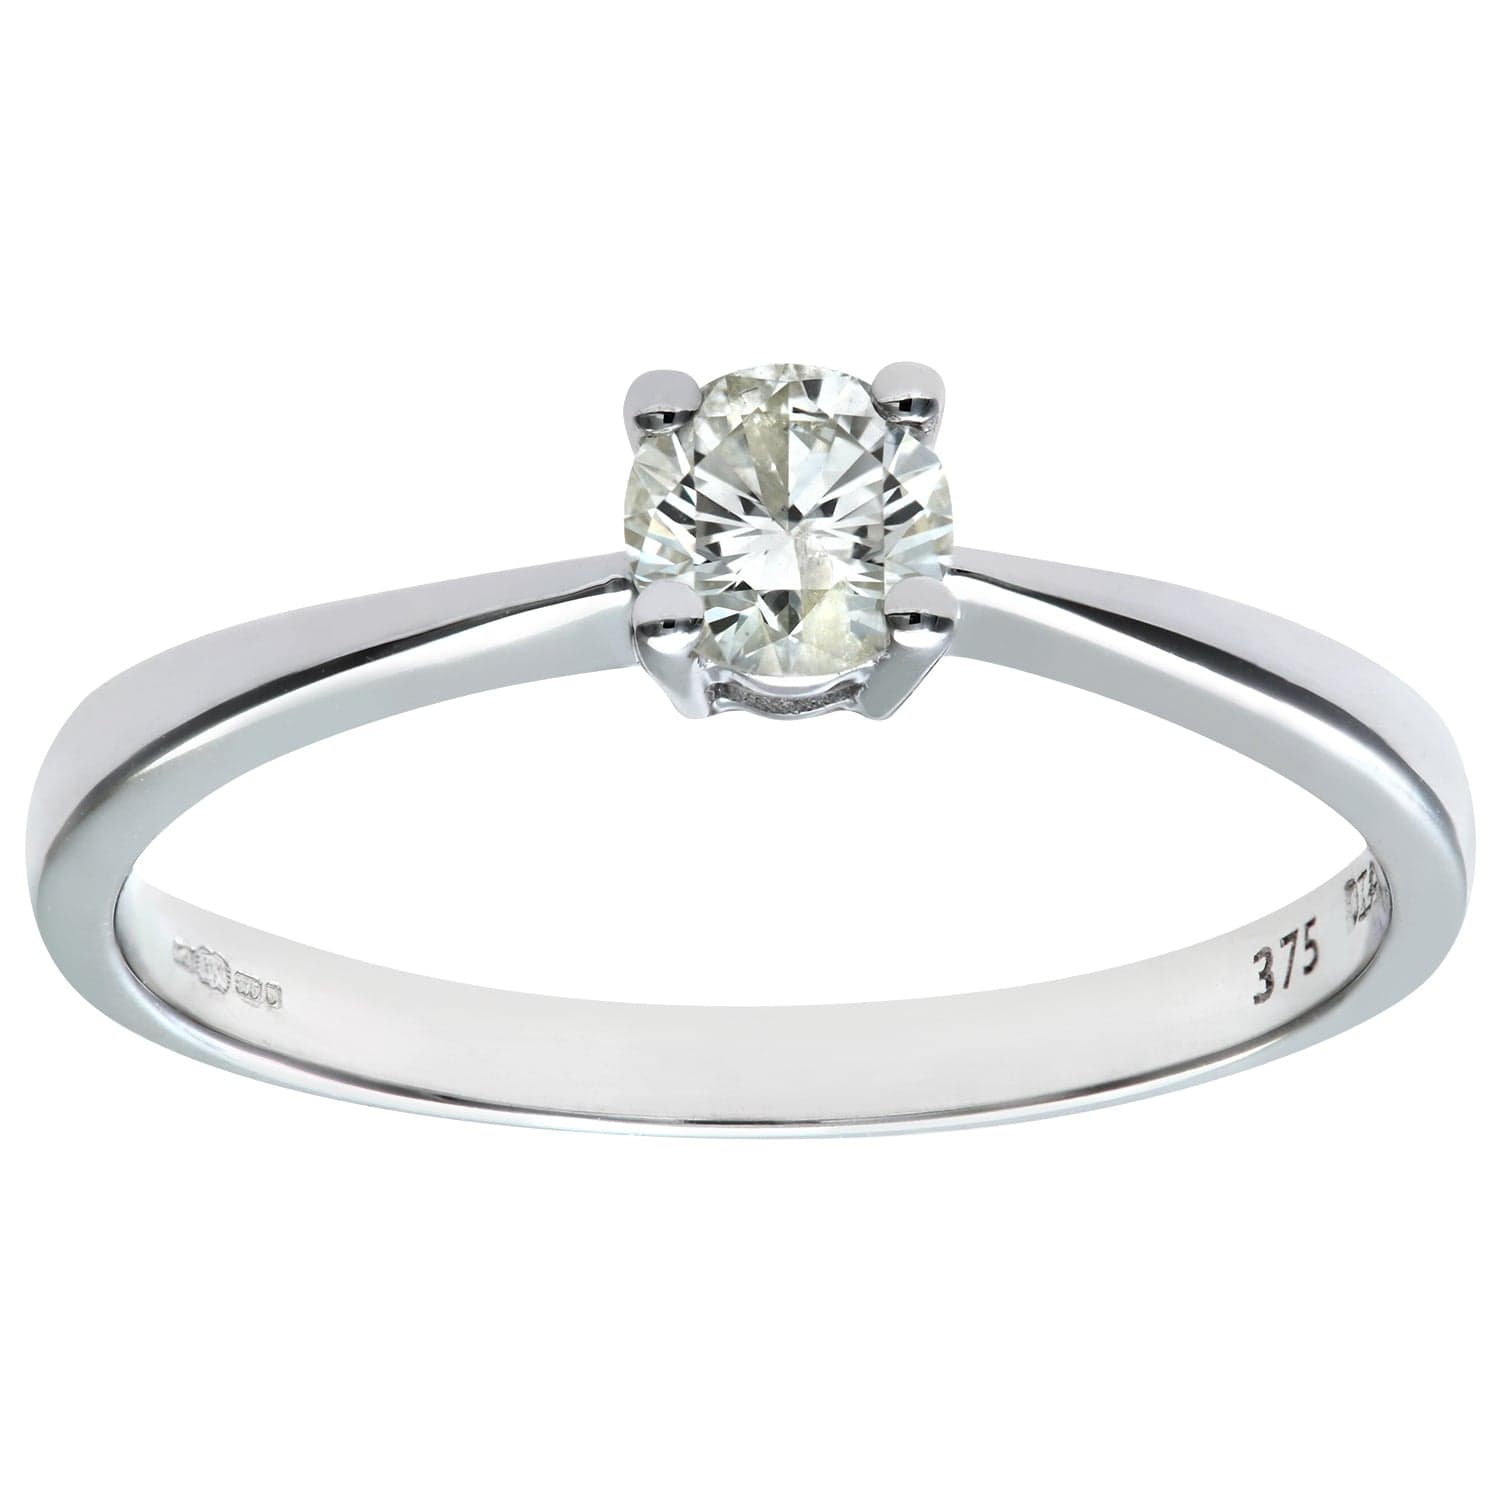 Lynora Luxe Ring White Gold 9ct / Diamond 9ct White Gold 0.33ct Diamond Engagement Ring